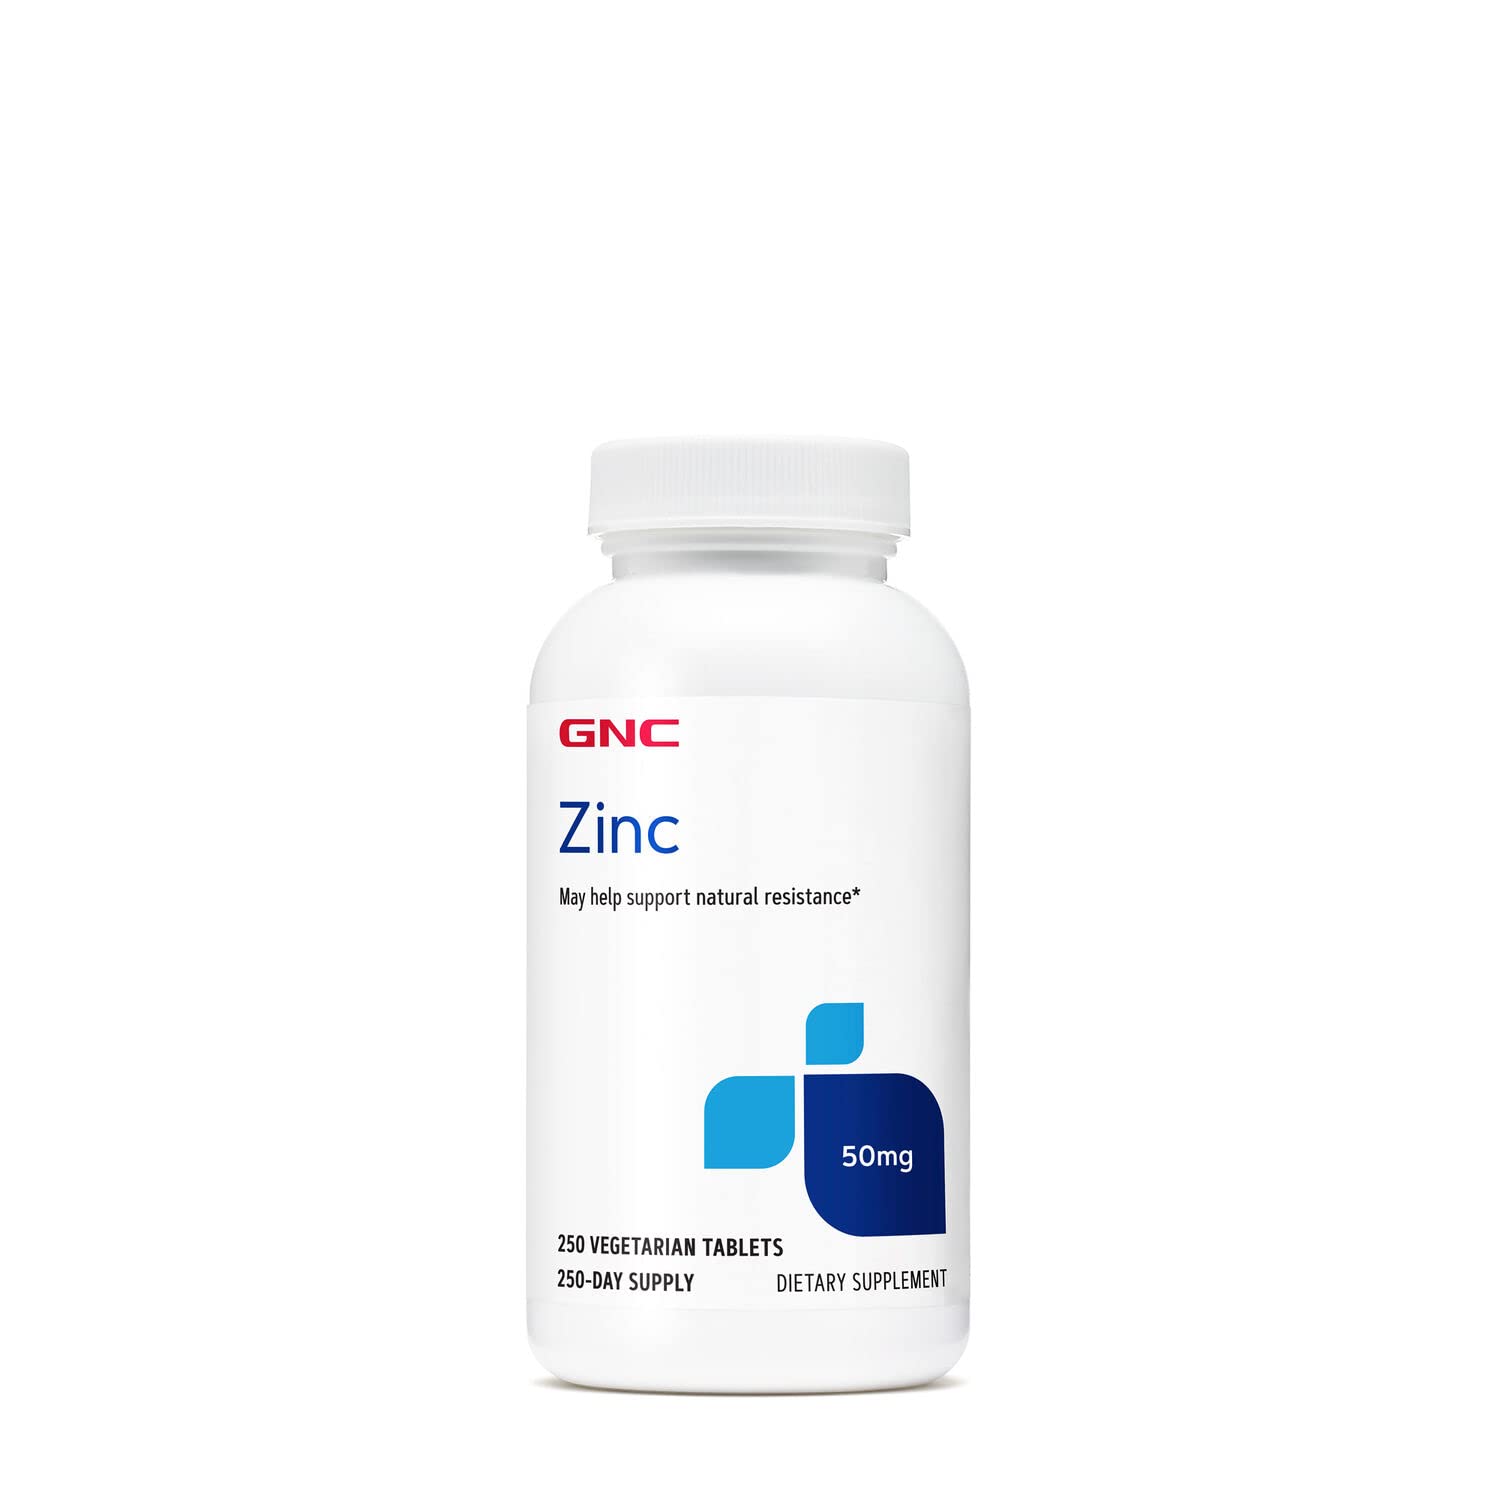 GNC Zinc 50mg, 250 Tablets, Supports Natural Resistance in Immune System